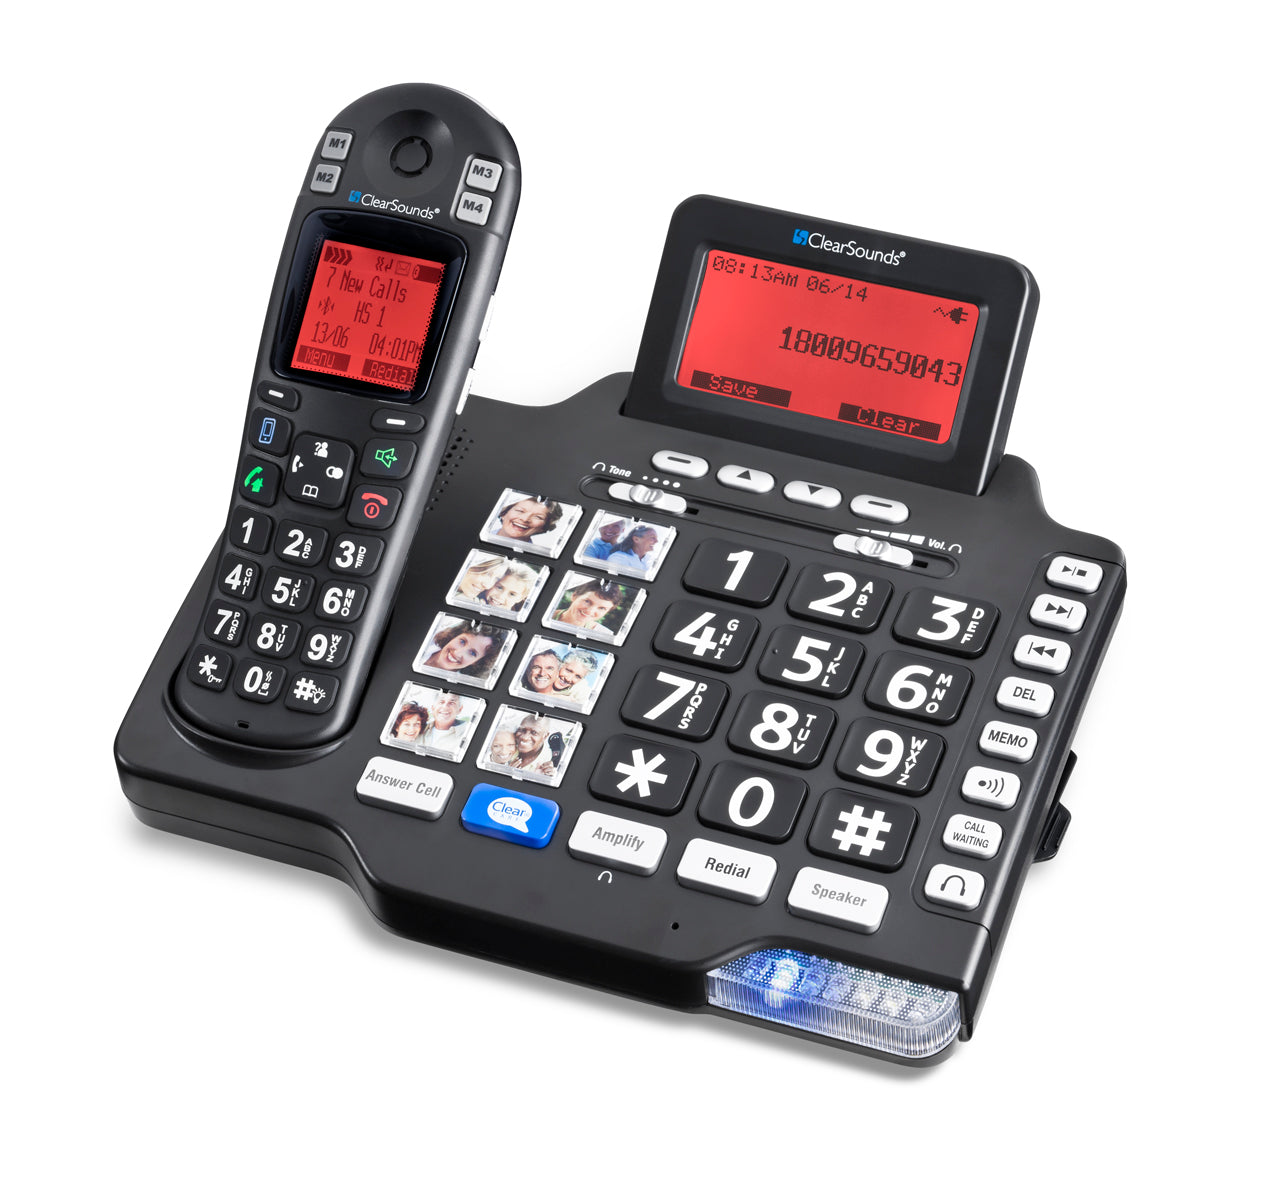 Clear Sounds A1600BT Dect Amplified Deluxe Phone With BT